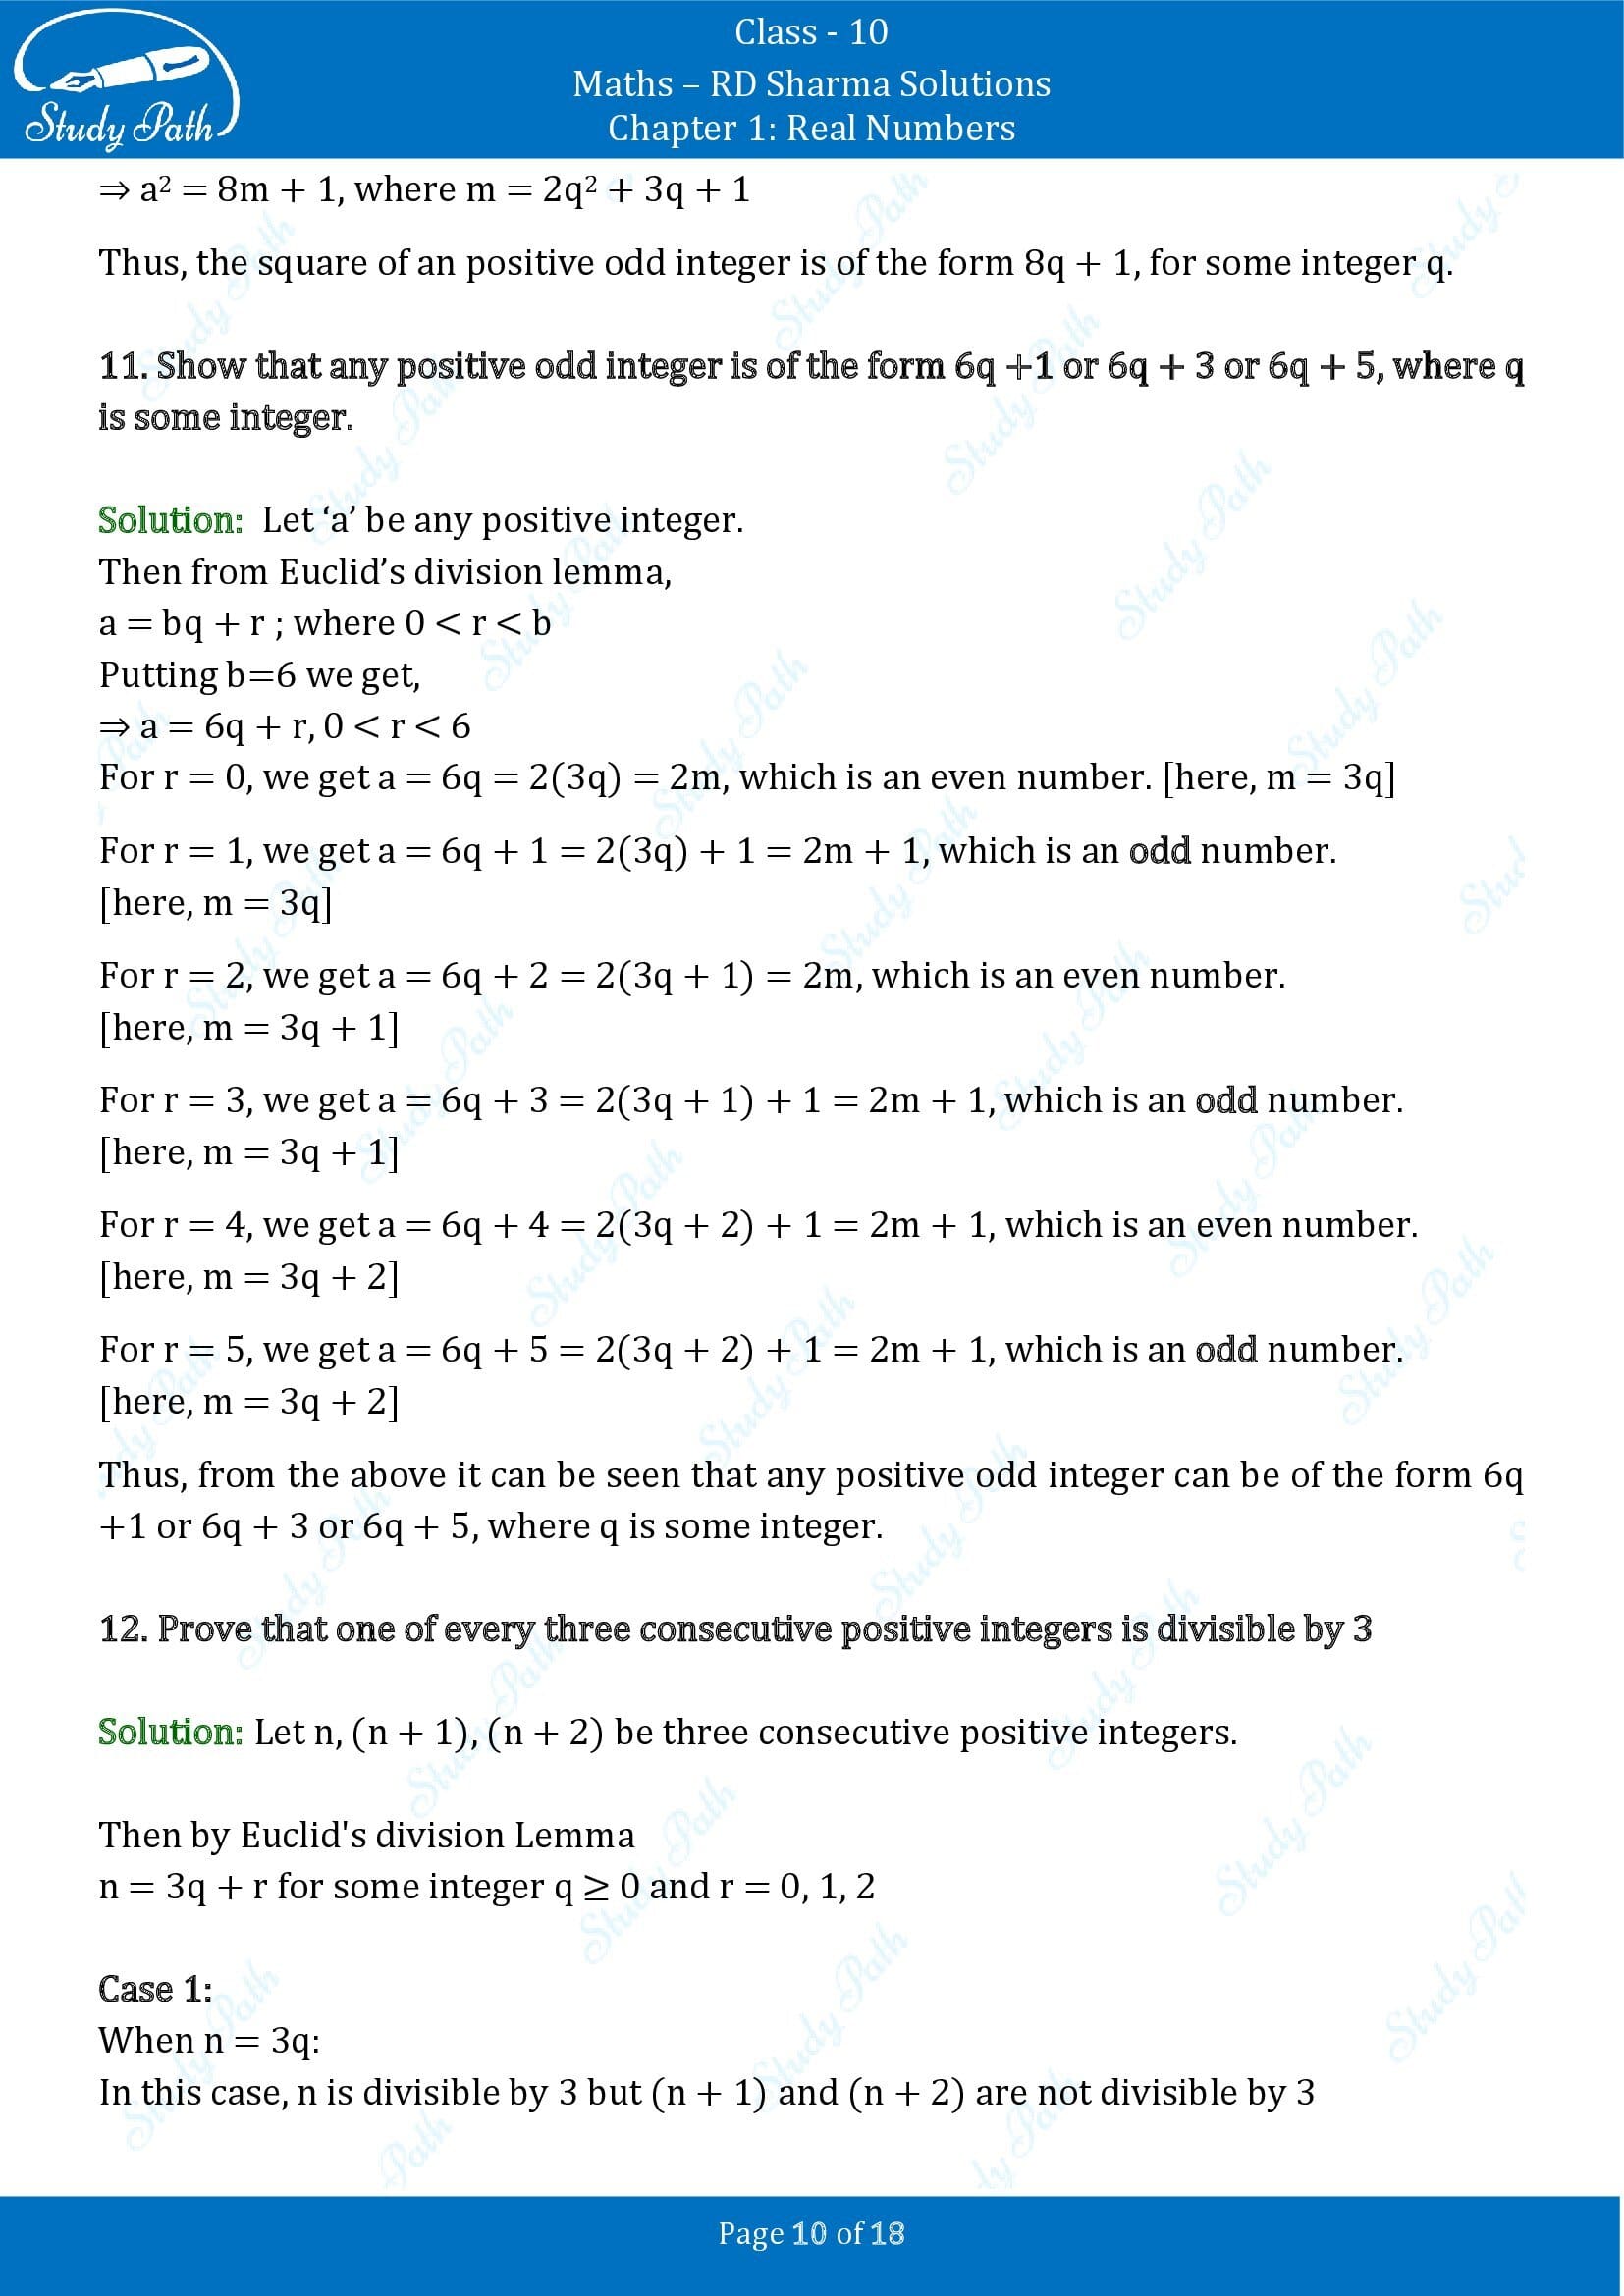 RD Sharma Solutions Class 10 Chapter 1 Real Numbers Exercise 1.1 00010